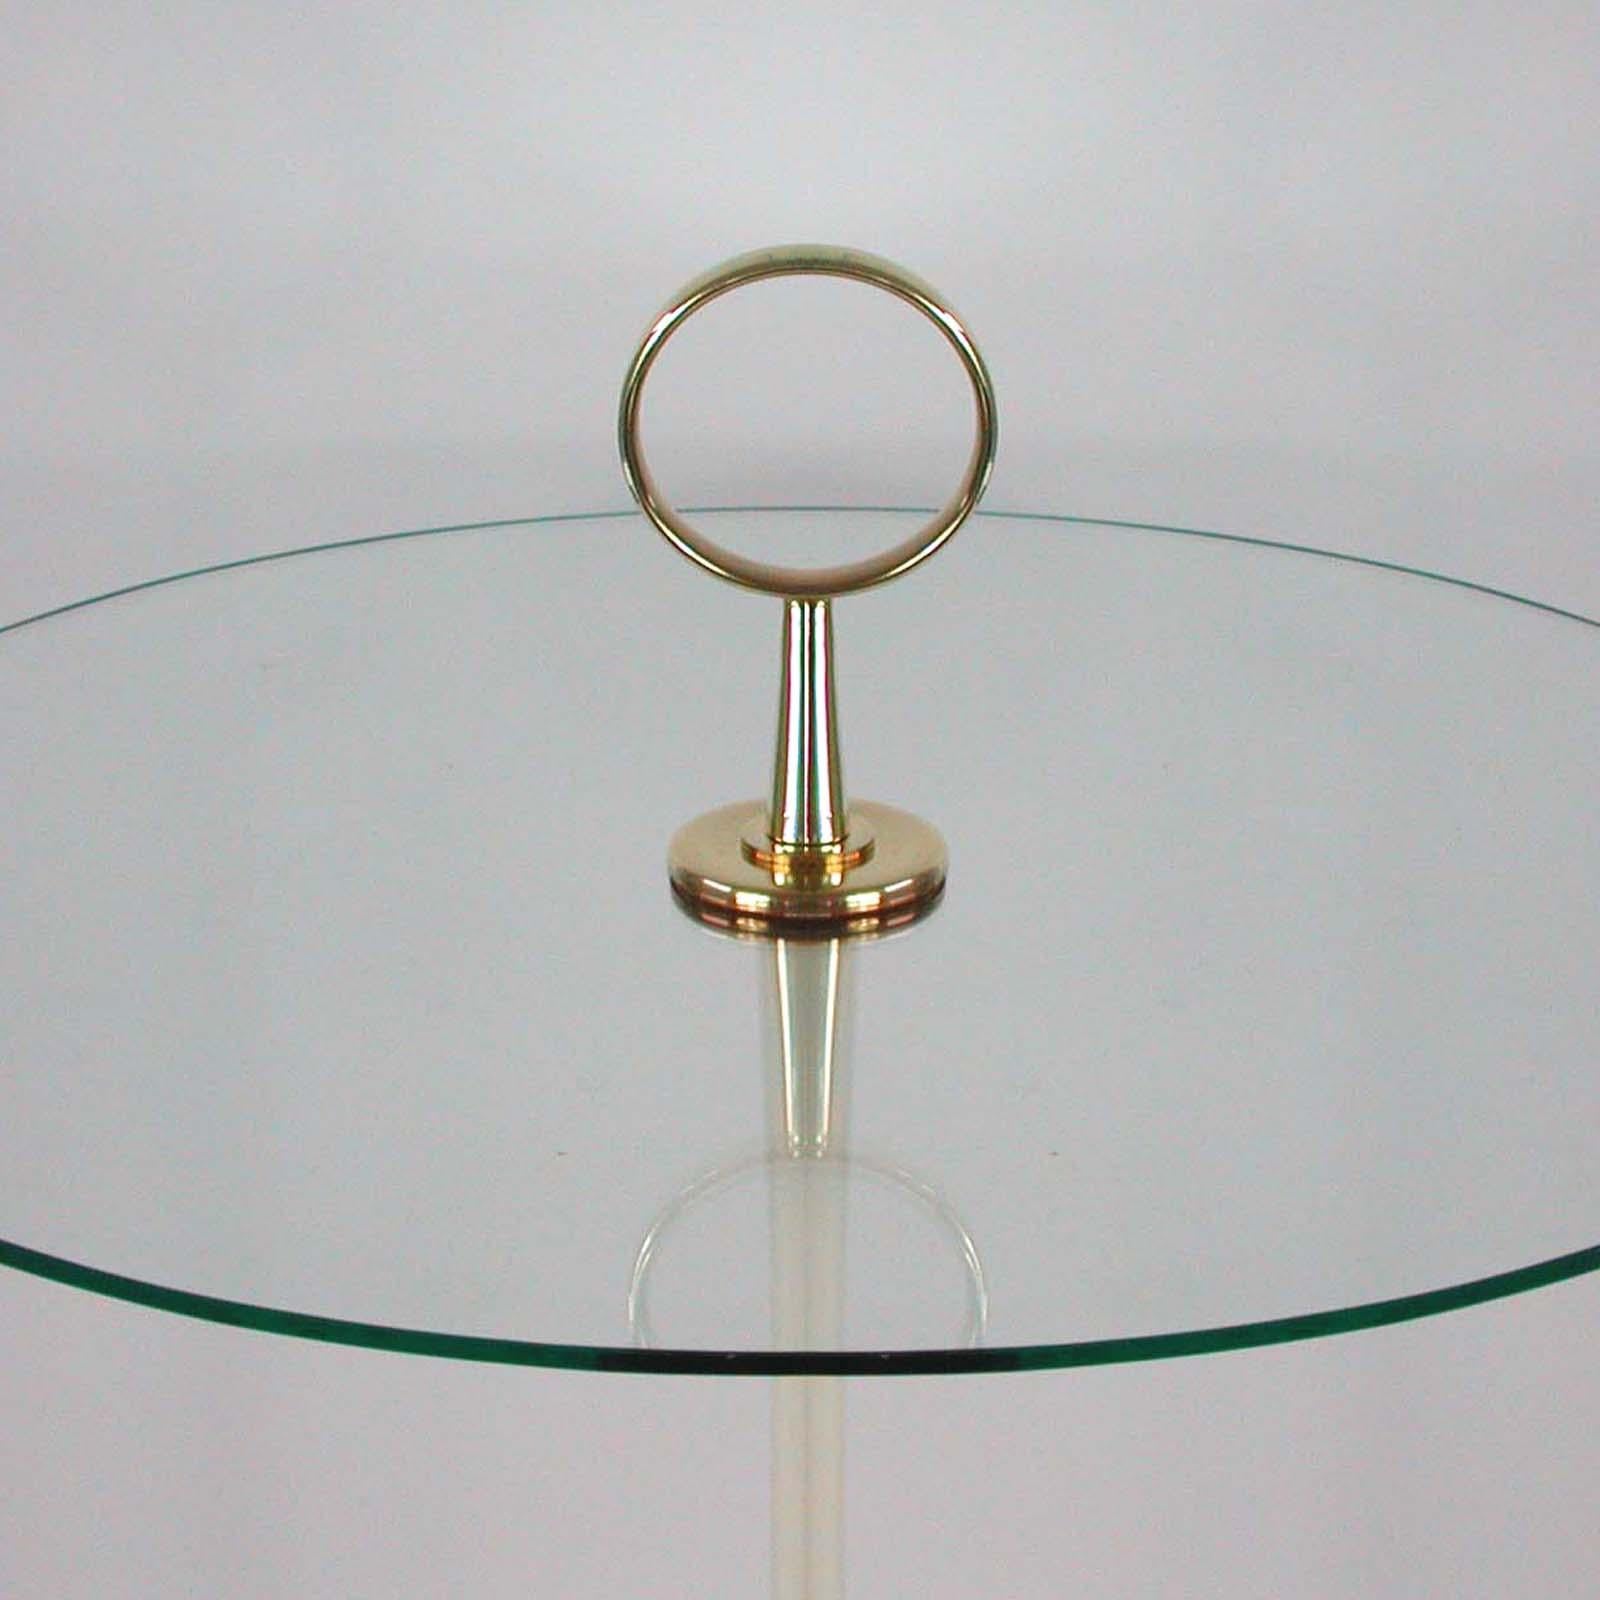 Cesare Lacca Midcentury Brass and Clear Glass Tripod Side Table, Italy, 1950s For Sale 5